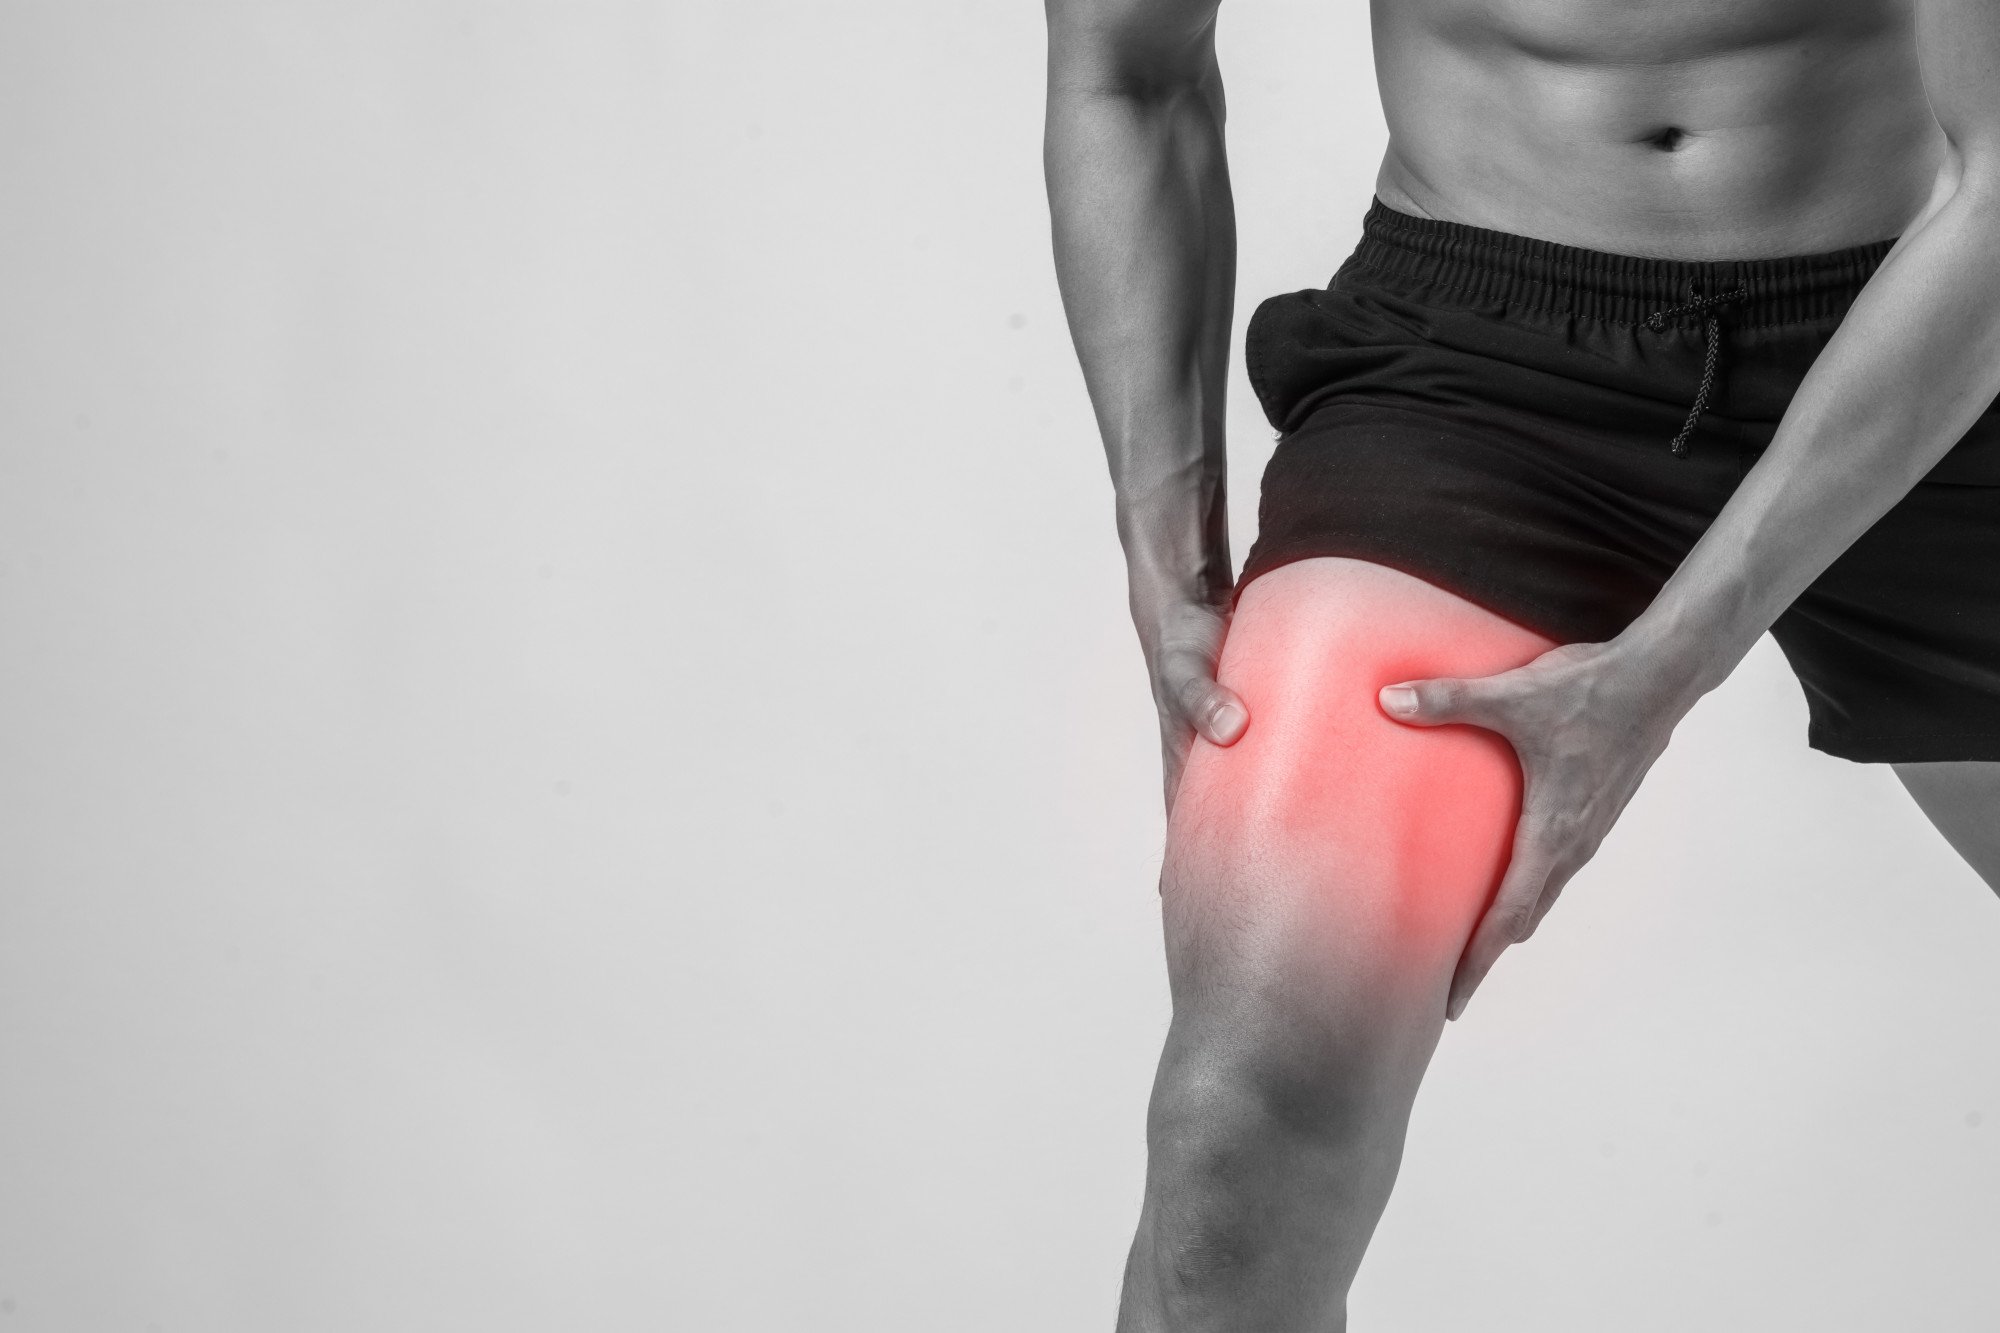 Get back to your active routine faster and accelerate muscle strain healing. Read on to learn how to speed up muscle strain recovery here.